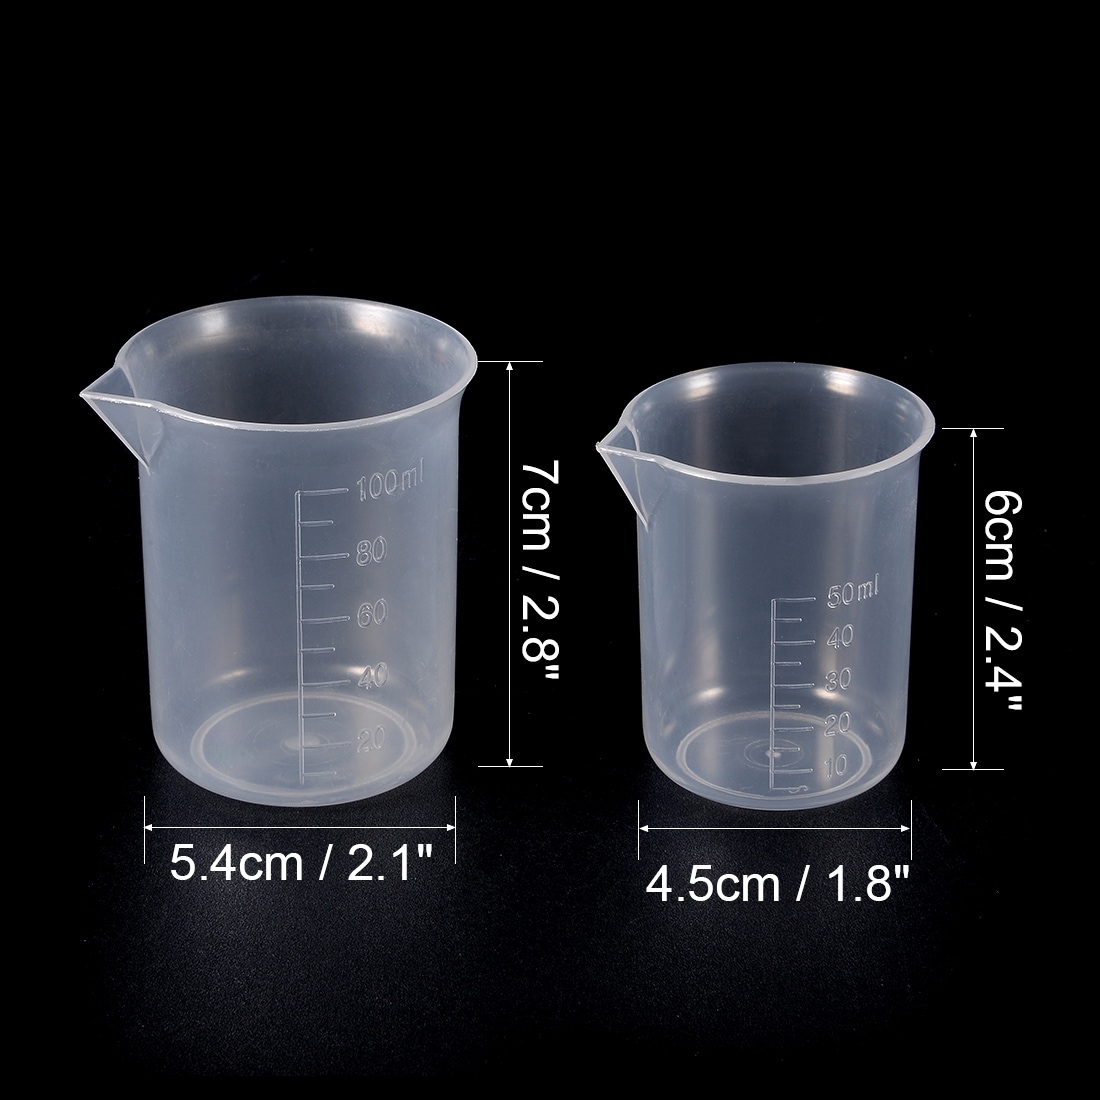 https://ak1.ostkcdn.com/images/products/is/images/direct/6623ad918d5449ab606ab6cc9902b2af505a0363/Set-of-2-Measuring-Cup-Labs-Clear-Plastic-Graduated-Beakers-50ml-100ml.jpg